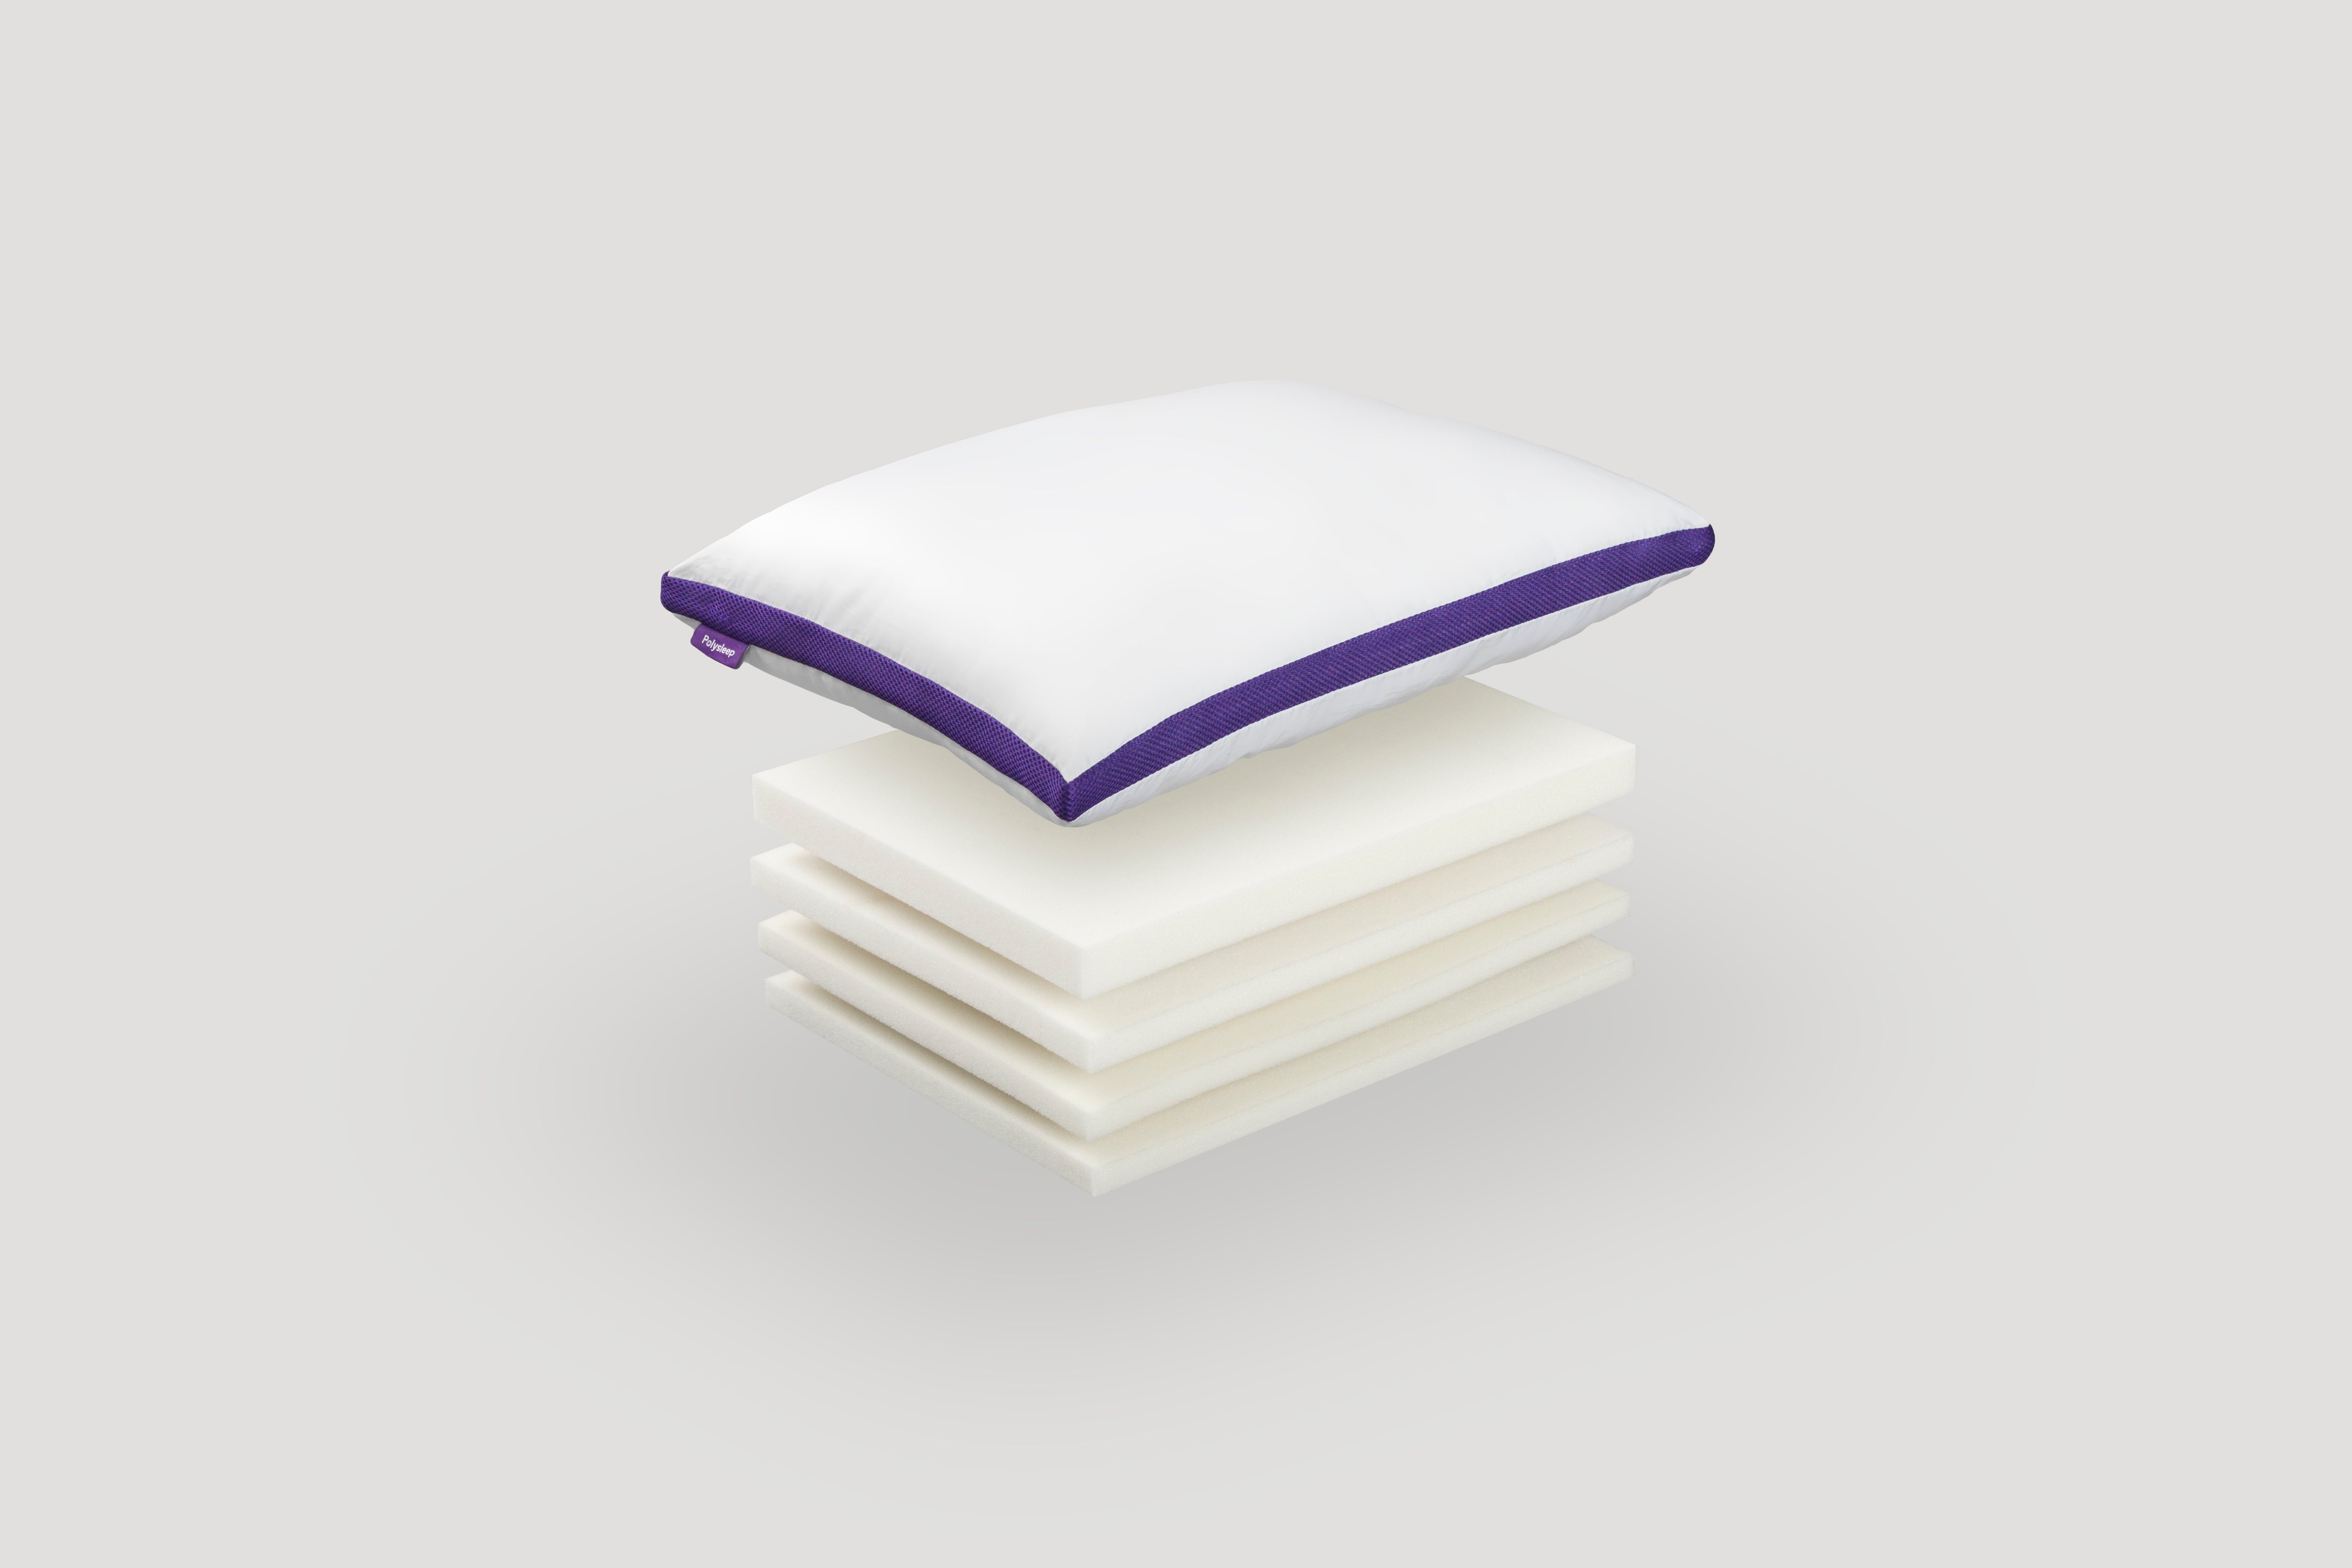 Thickness and foam layers of the Polysleep pillow